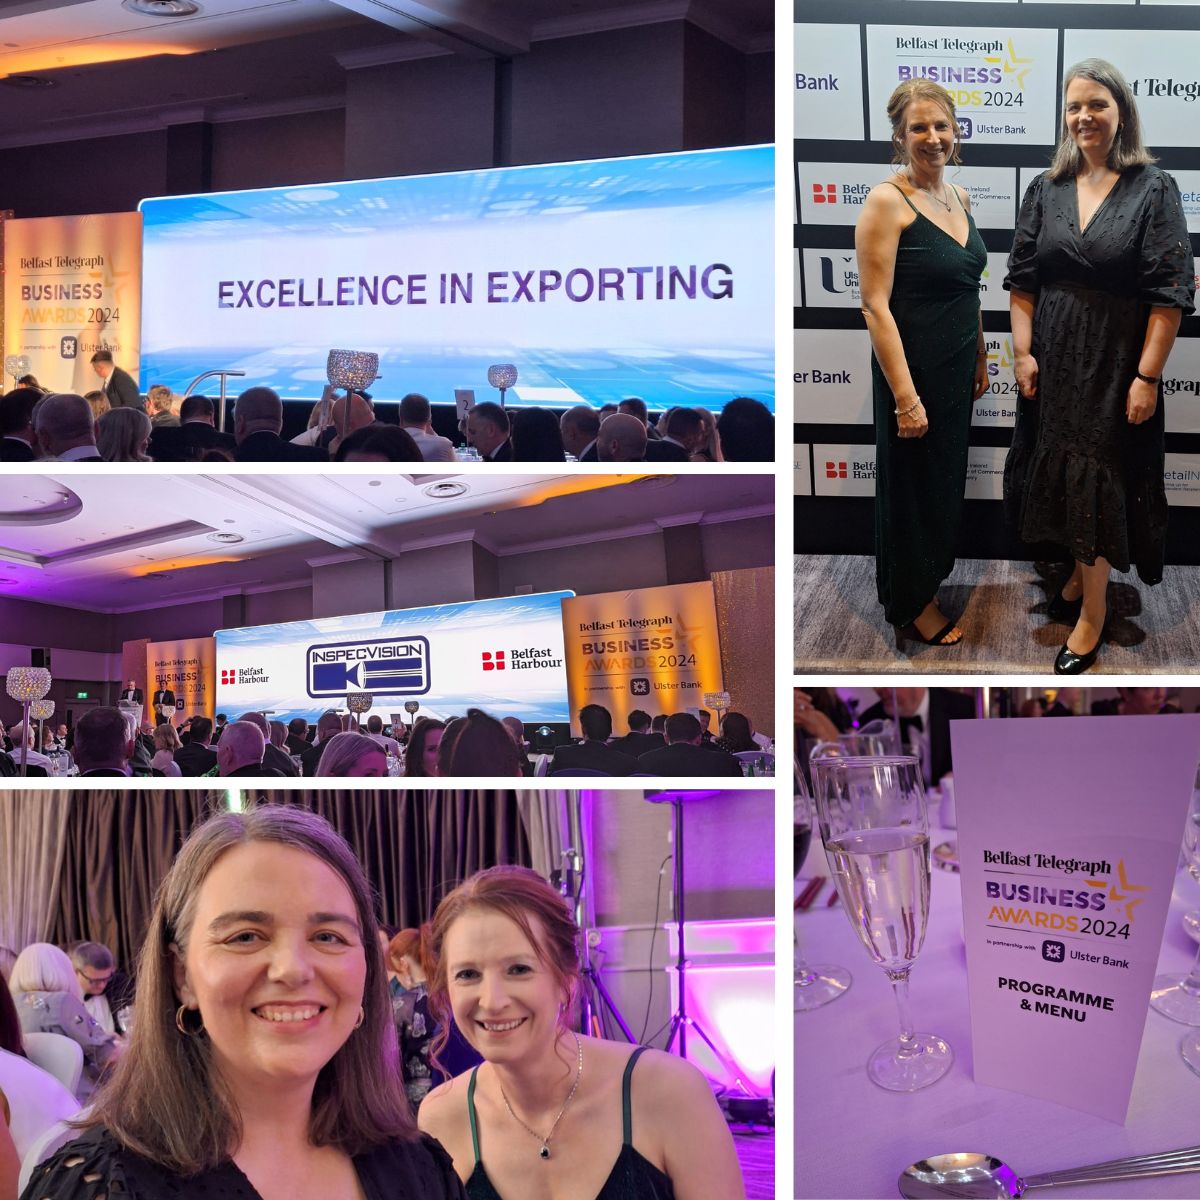 Honoured to have been part of the prestigious #BelTelAwards last night!

No trophy this time but being shortlisted as one of the top businesses in Northern Ireland is an achievement we are immensely proud of.

Congratulations to all the winners. 

#BusinessAwards #Exportbusiness